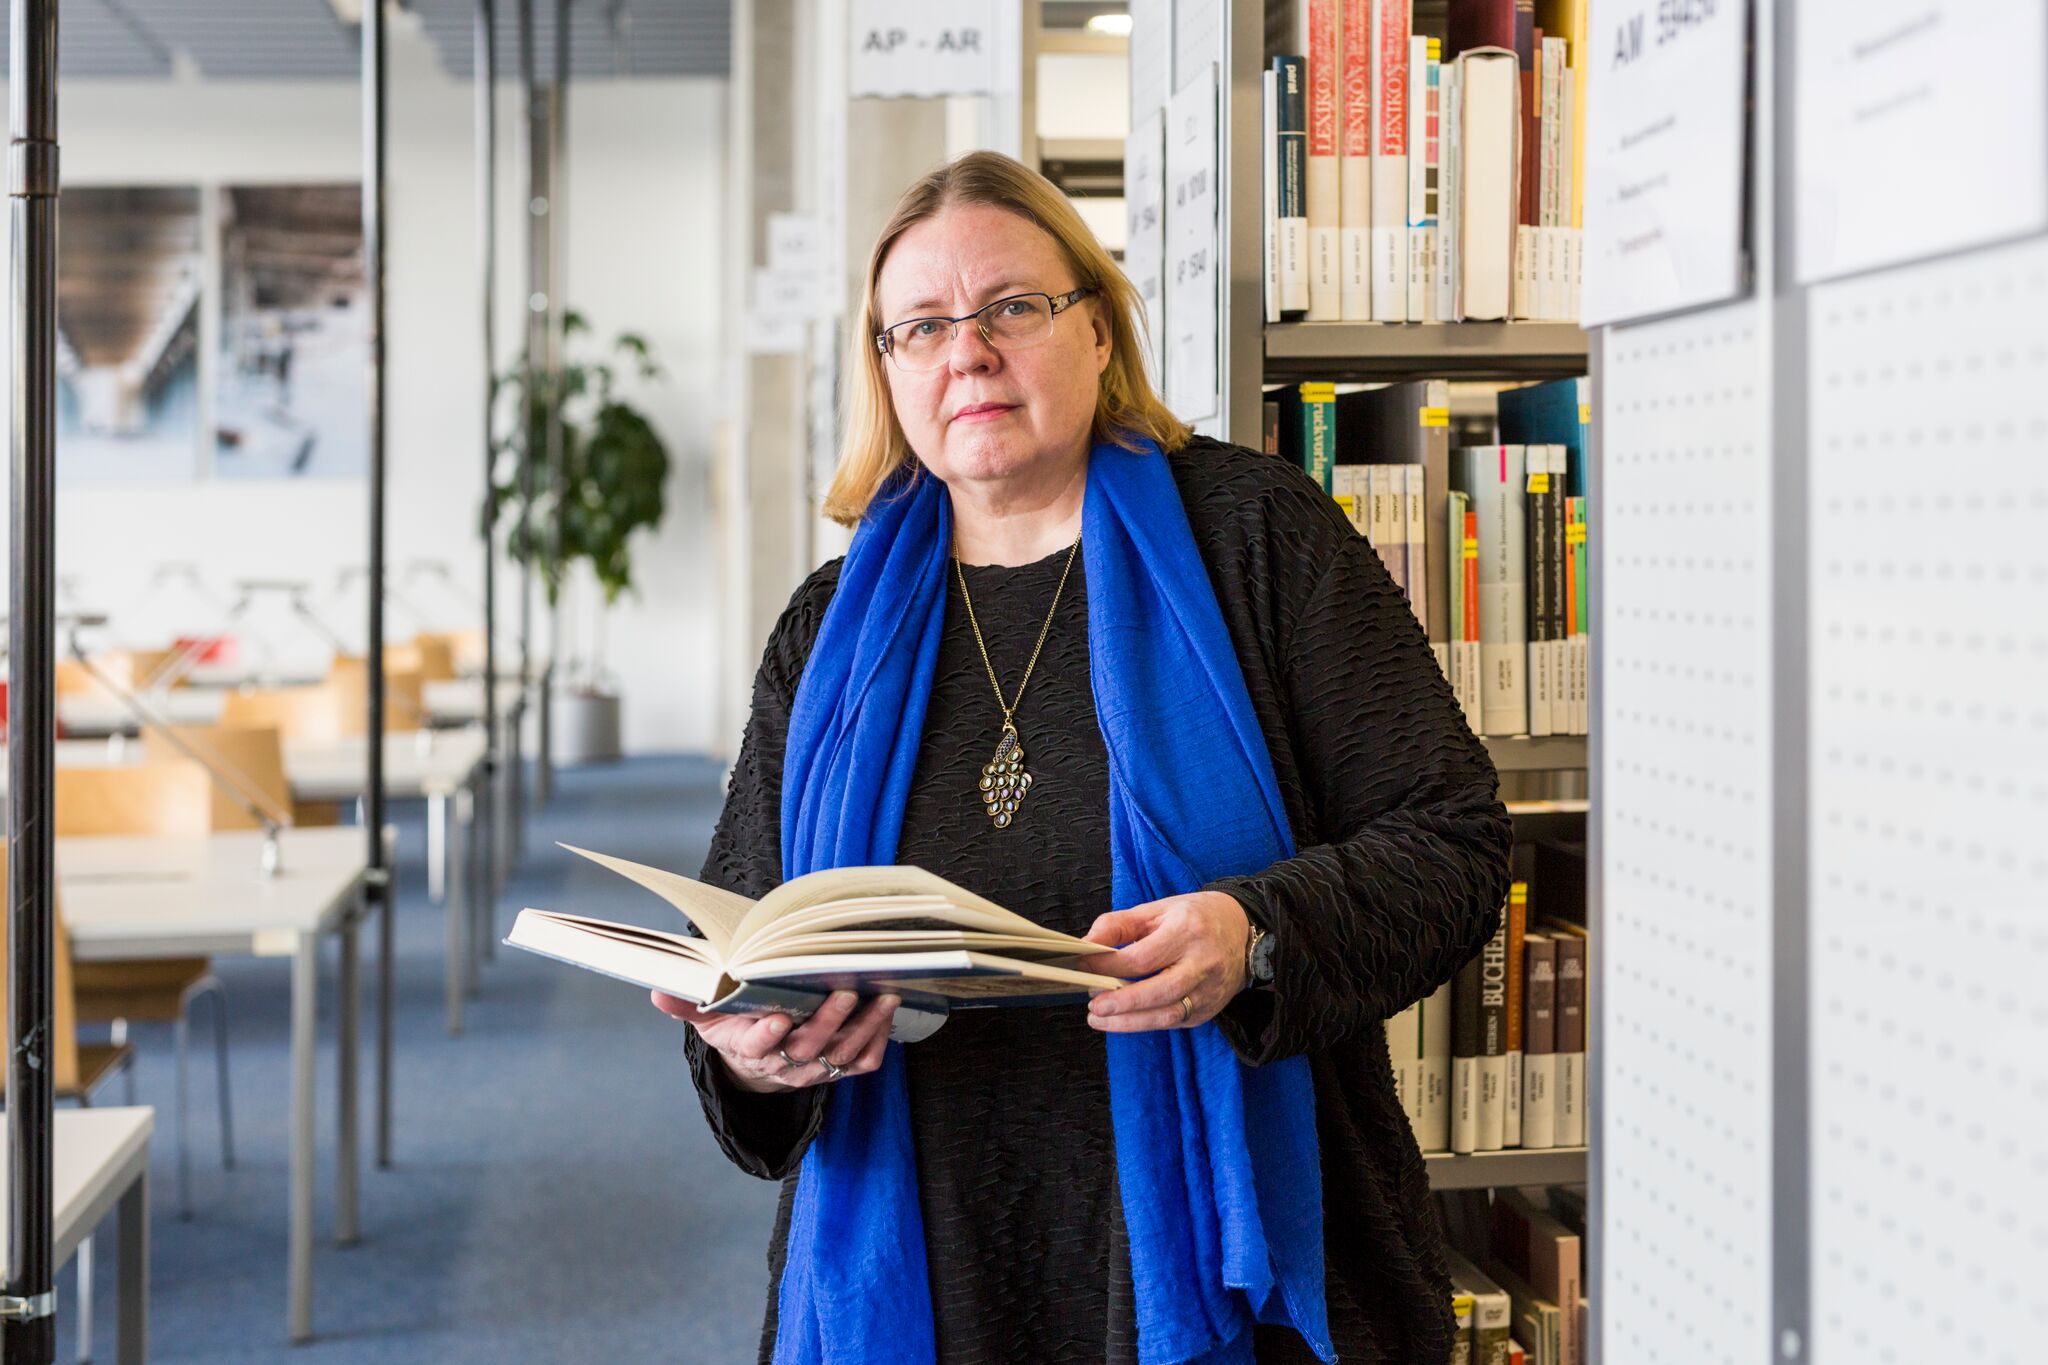 Debora Weber-Wulff in the library with book